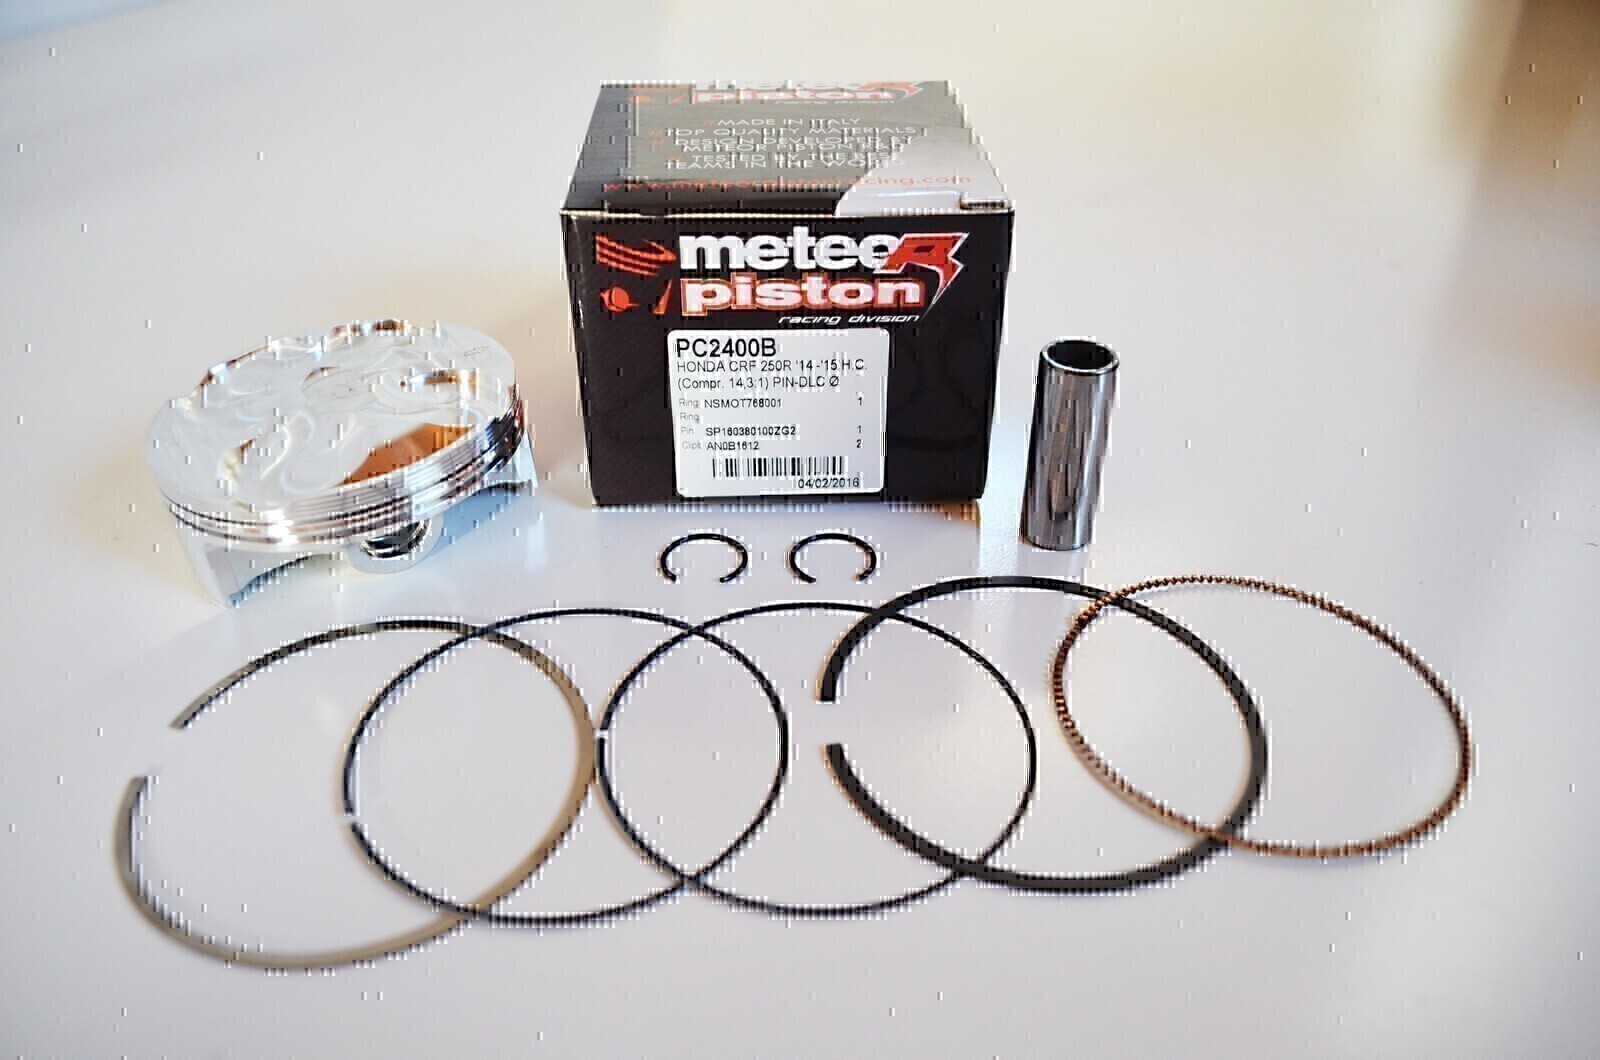 METEOR PISTON KIT FOR HONDA 4T CRF250R CRF 250R 2014 2015 HIGH COMP SIZE B